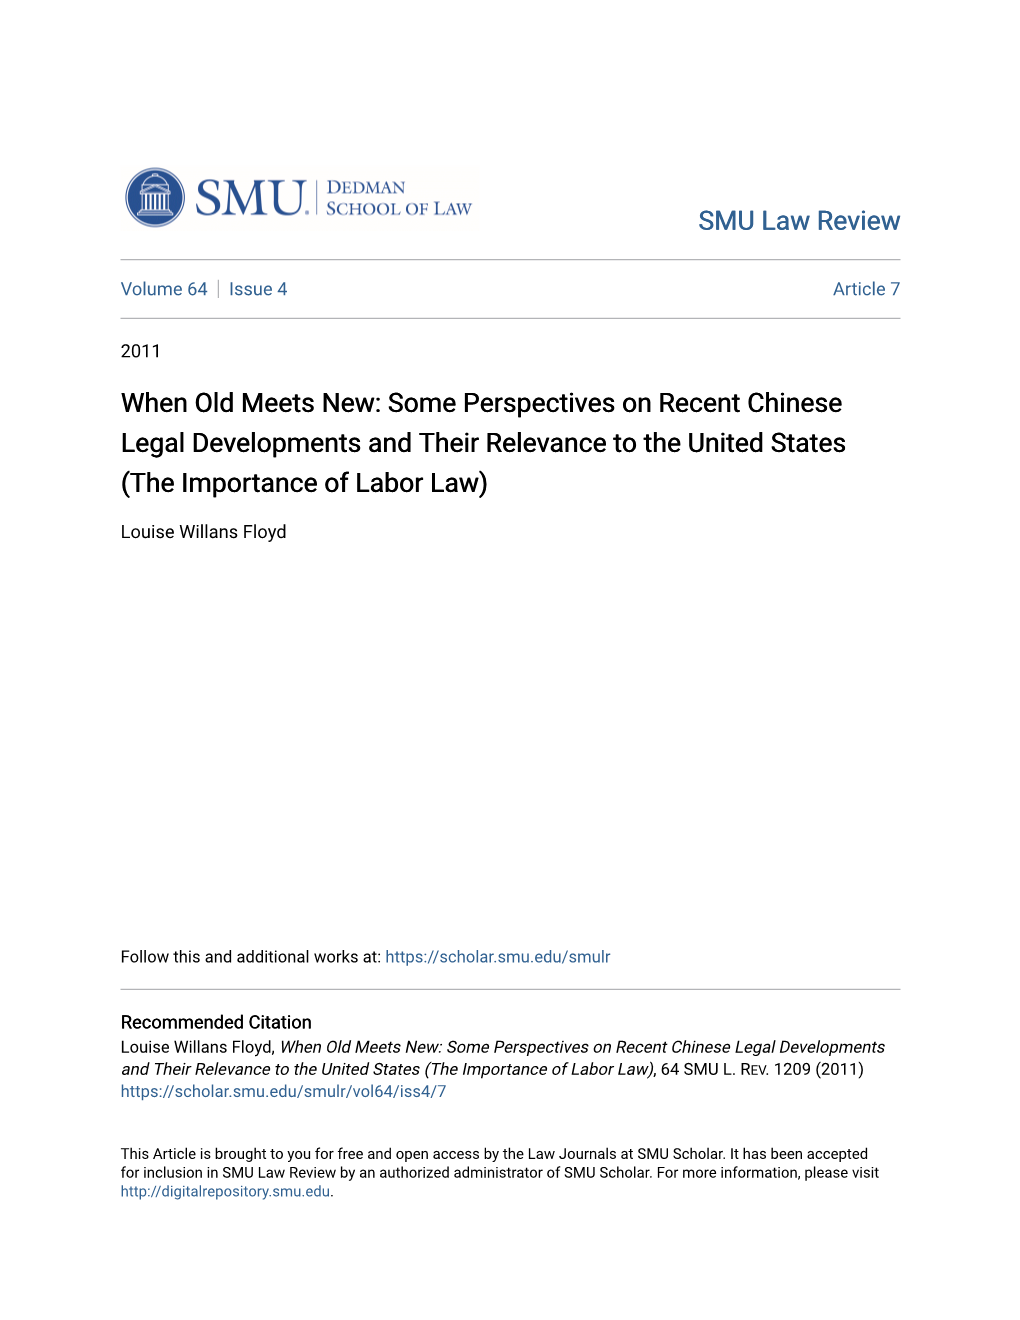 When Old Meets New: Some Perspectives on Recent Chinese Legal Developments and Their Relevance to the United States (The Importance of Labor Law)